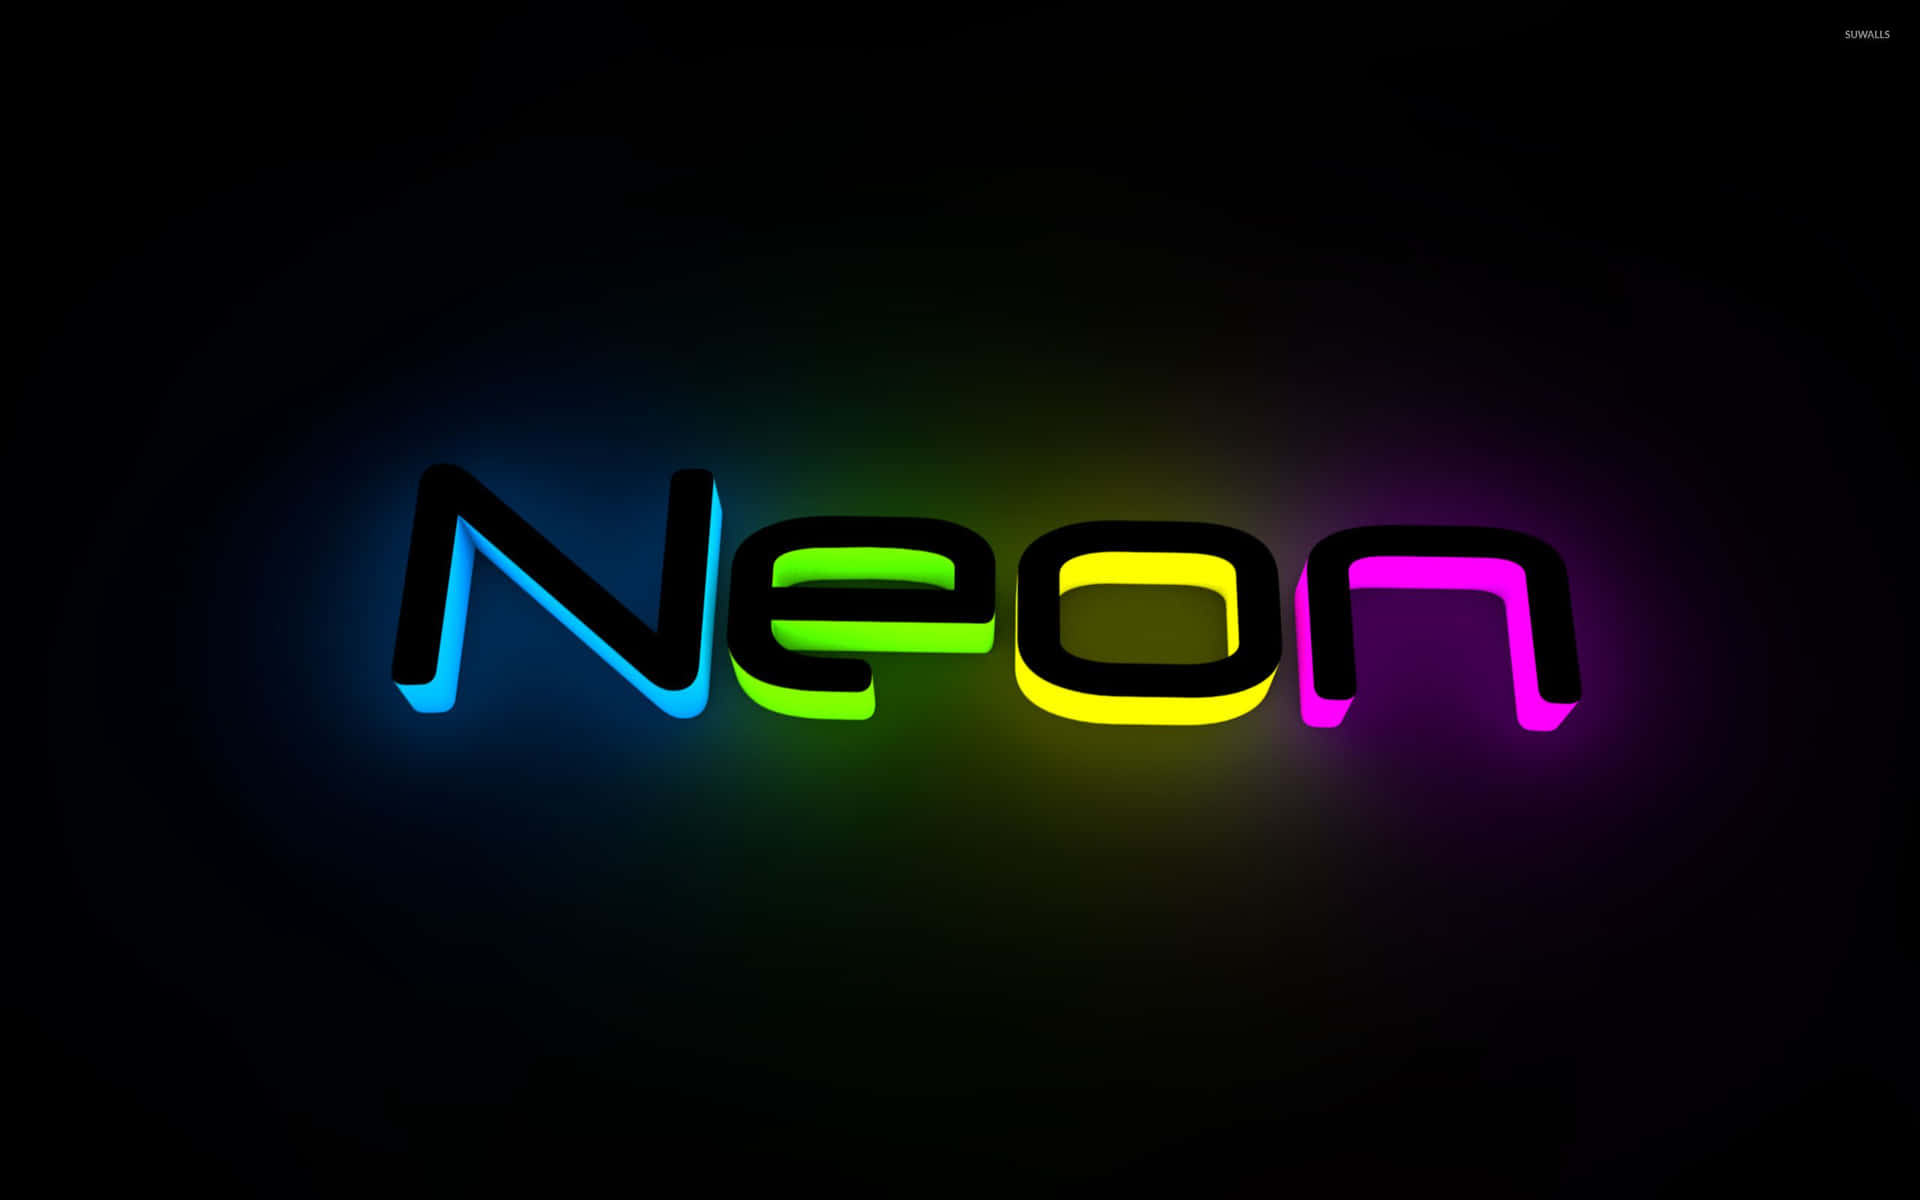 Neon lights can give an aesthetic to any environment. Wallpaper